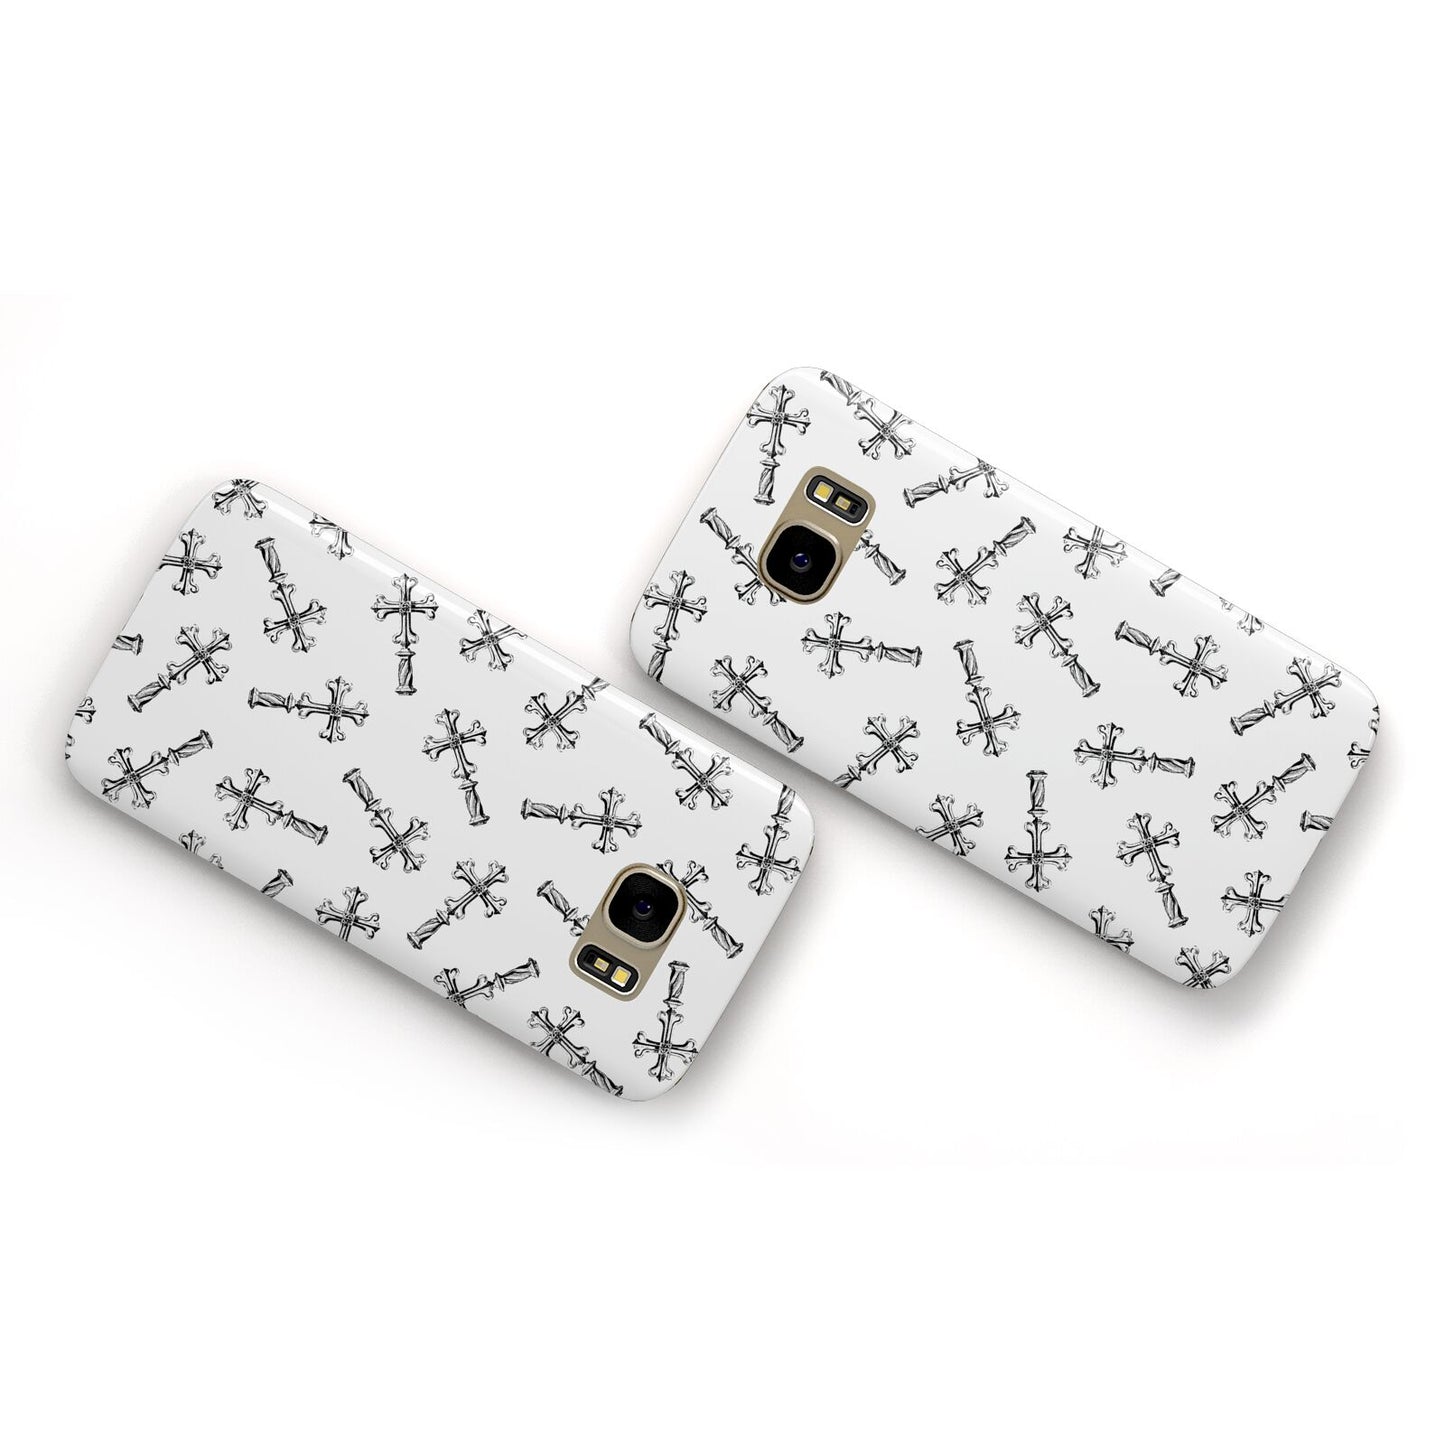 Monochrome Crosses Samsung Galaxy Case Flat Overview